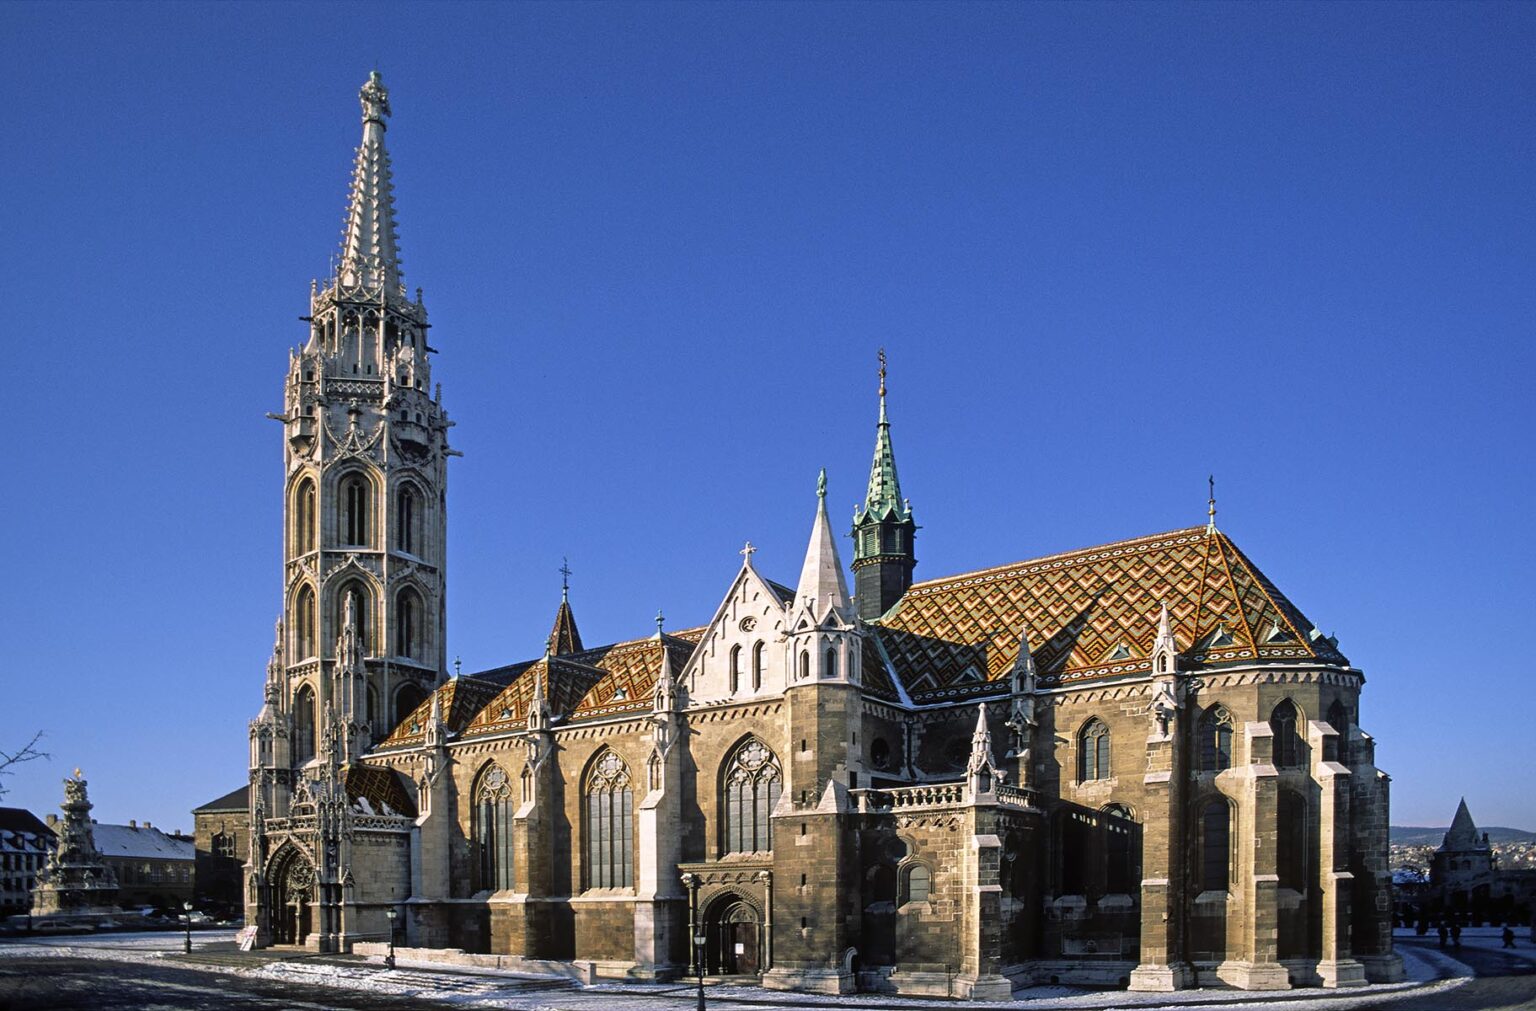 Situated atop CASTLE HILL is MATTHIAS CHURCH rebuilt in 1896 with its colorful tiled roof - BUDAPEST, HUNGARY